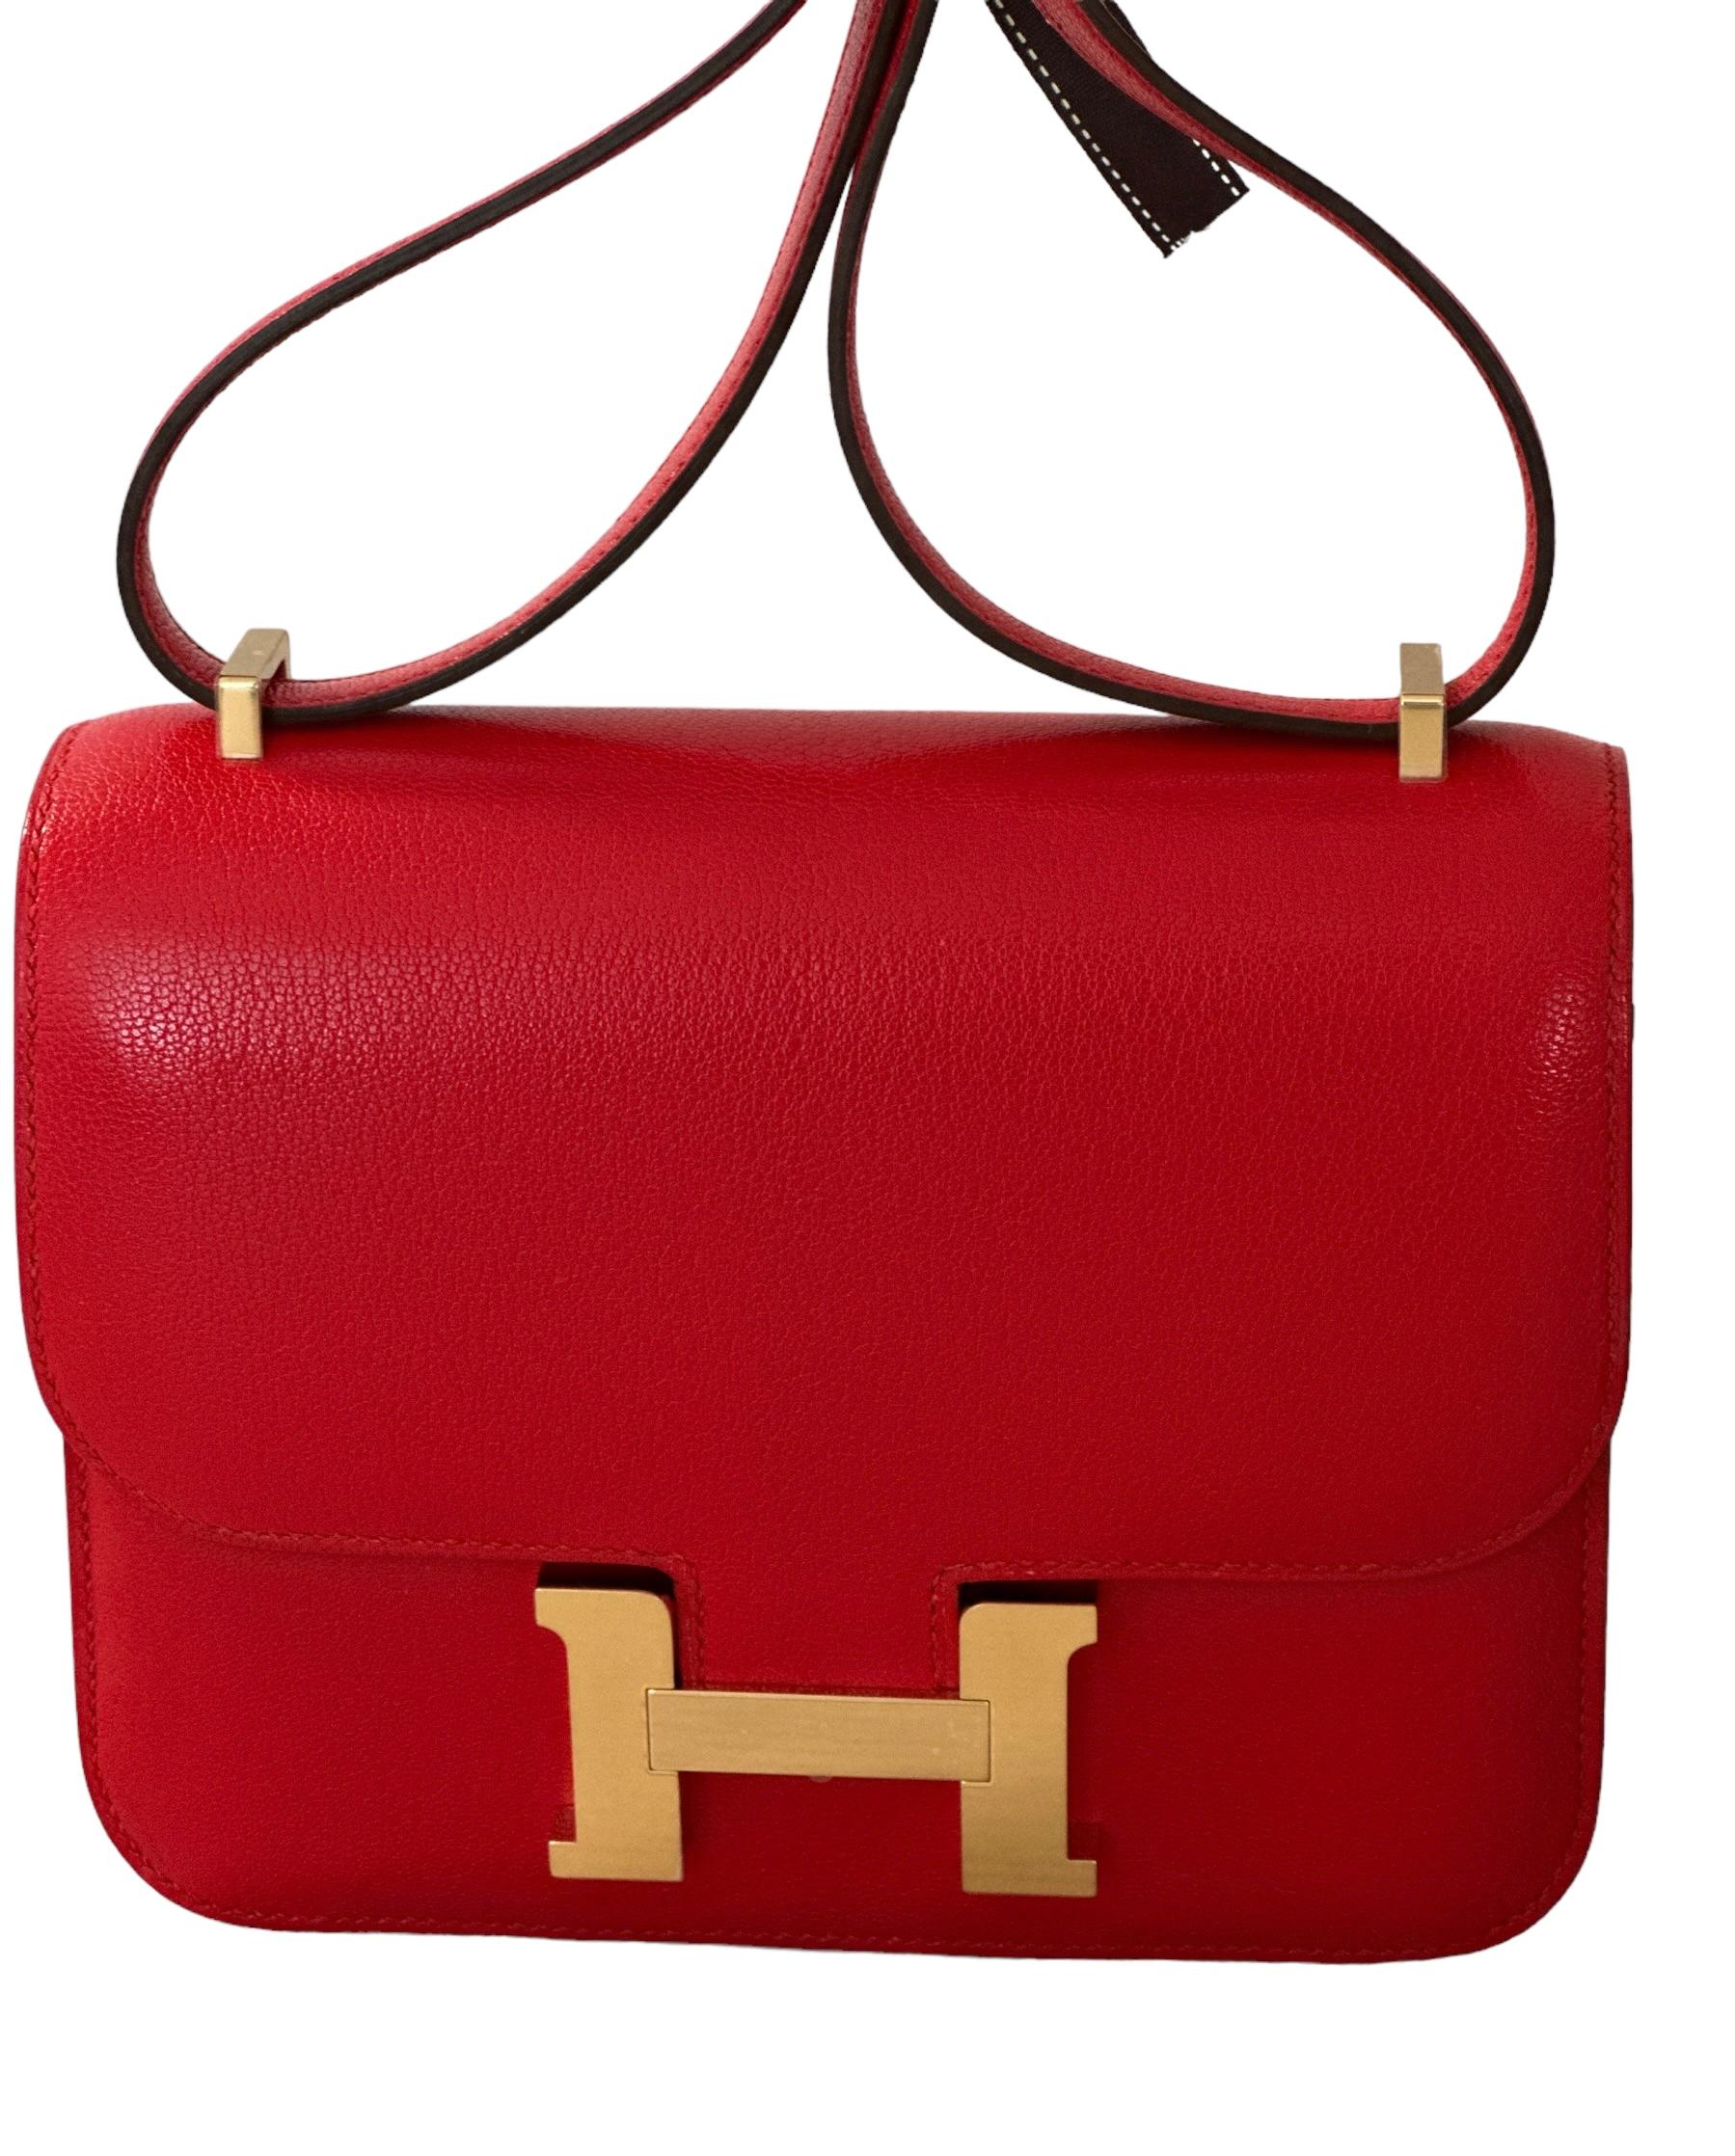 HERMES CONSTANCE BAG
Size 18cm
The mini size, the most popular size
Rouge De Coeur
Chevre Mysore leather
Chevre leather, one of the most durable leathers, sought after by collectors
Hardware Permabrass
Collection: B, indication production year